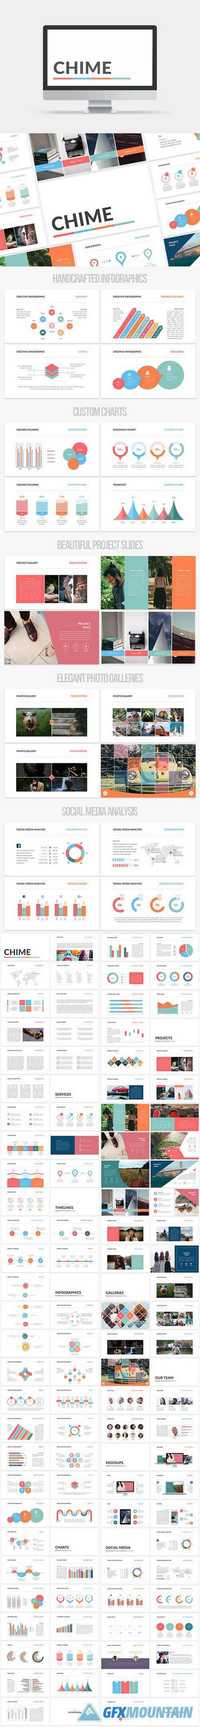 Chime PowerPoint Template 771226